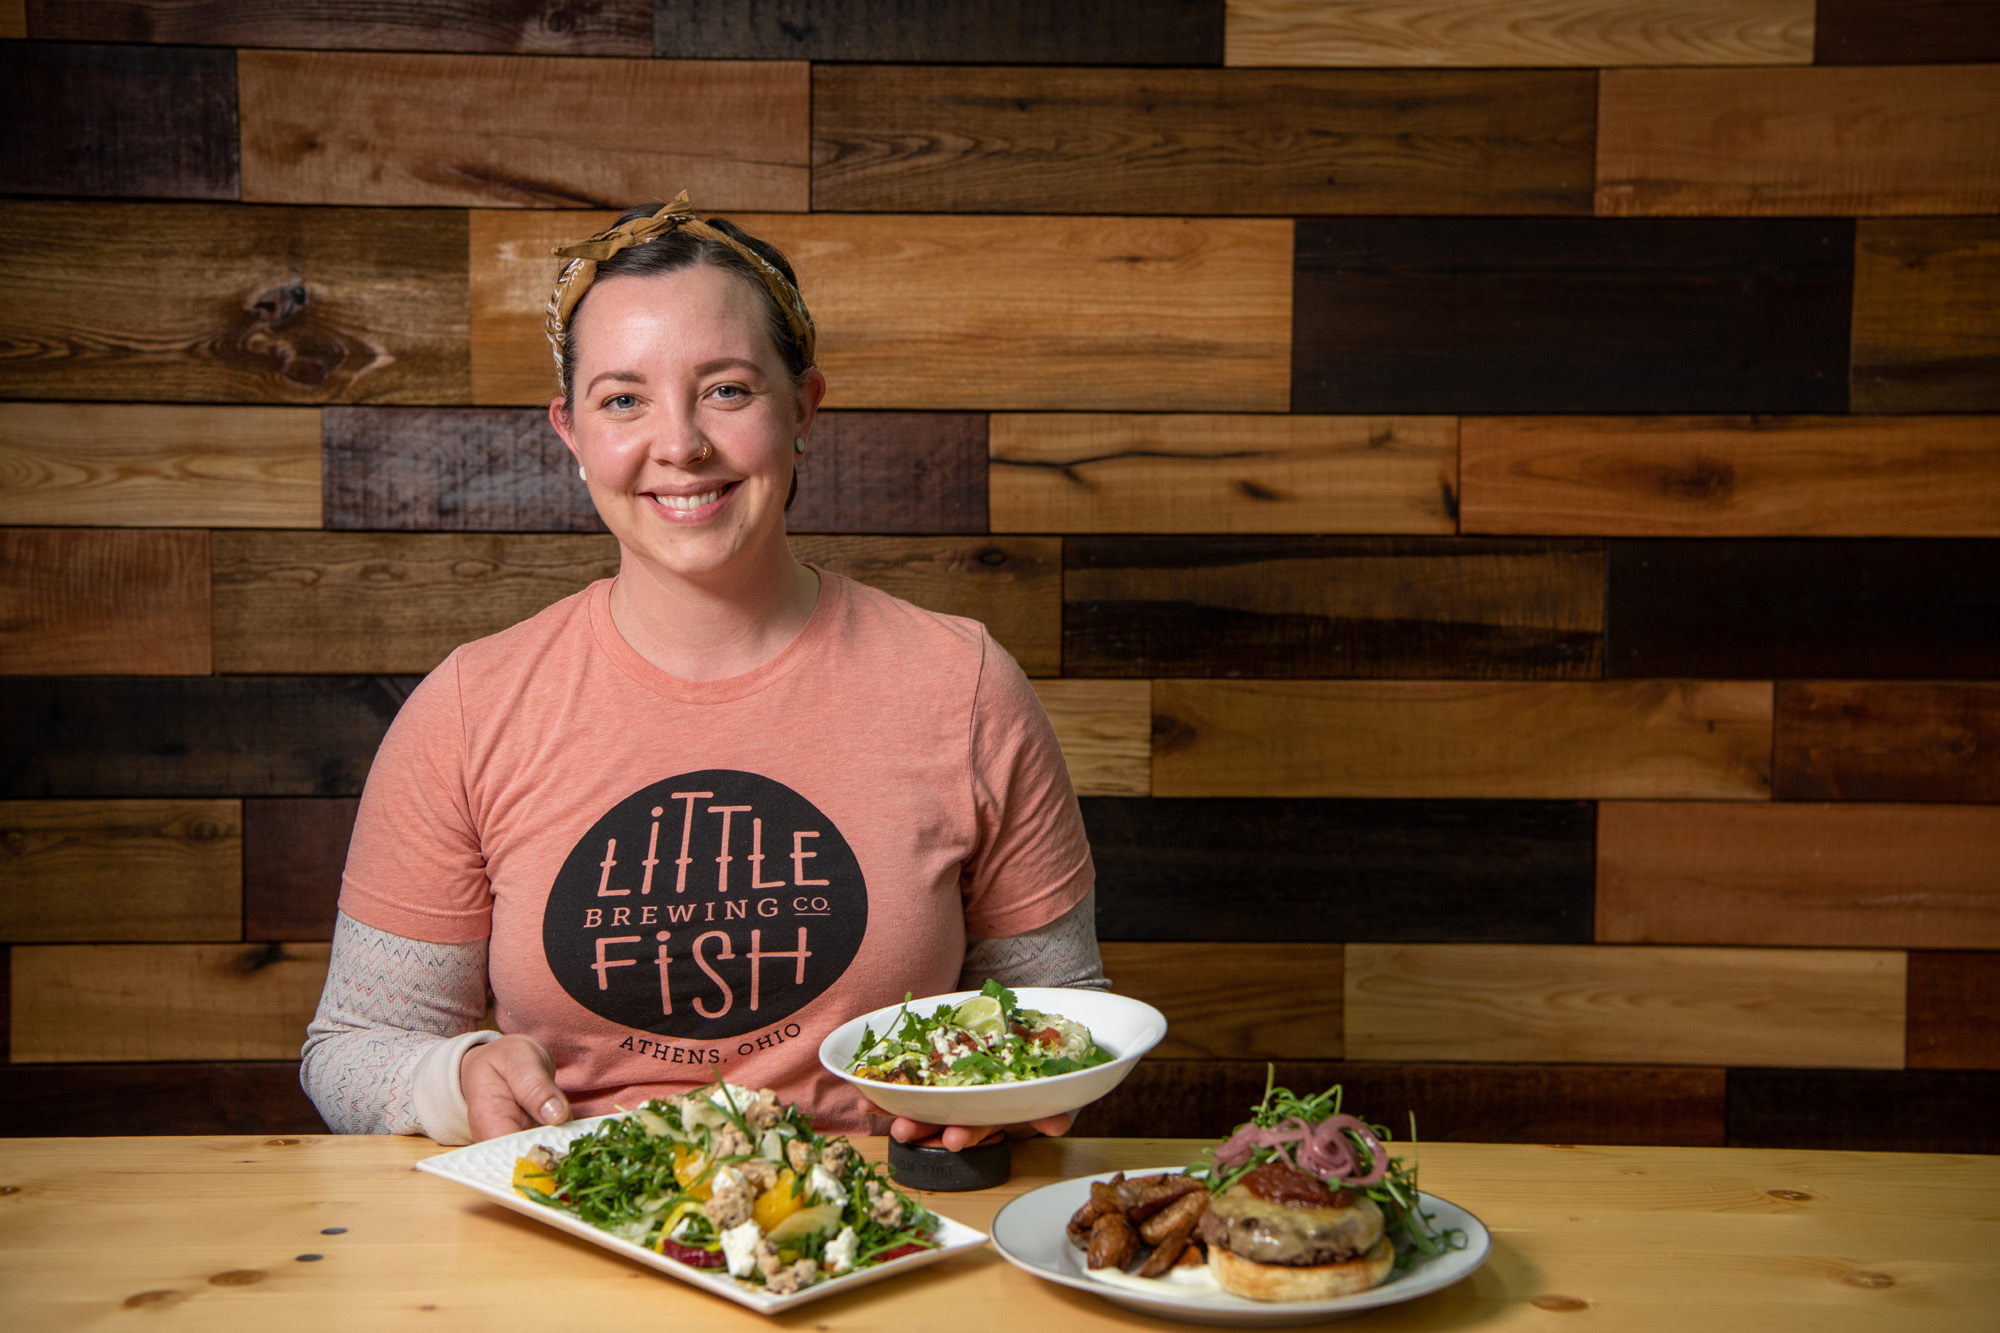 Portrait of Becky clark with fresh food from Little Fish Brewing Company